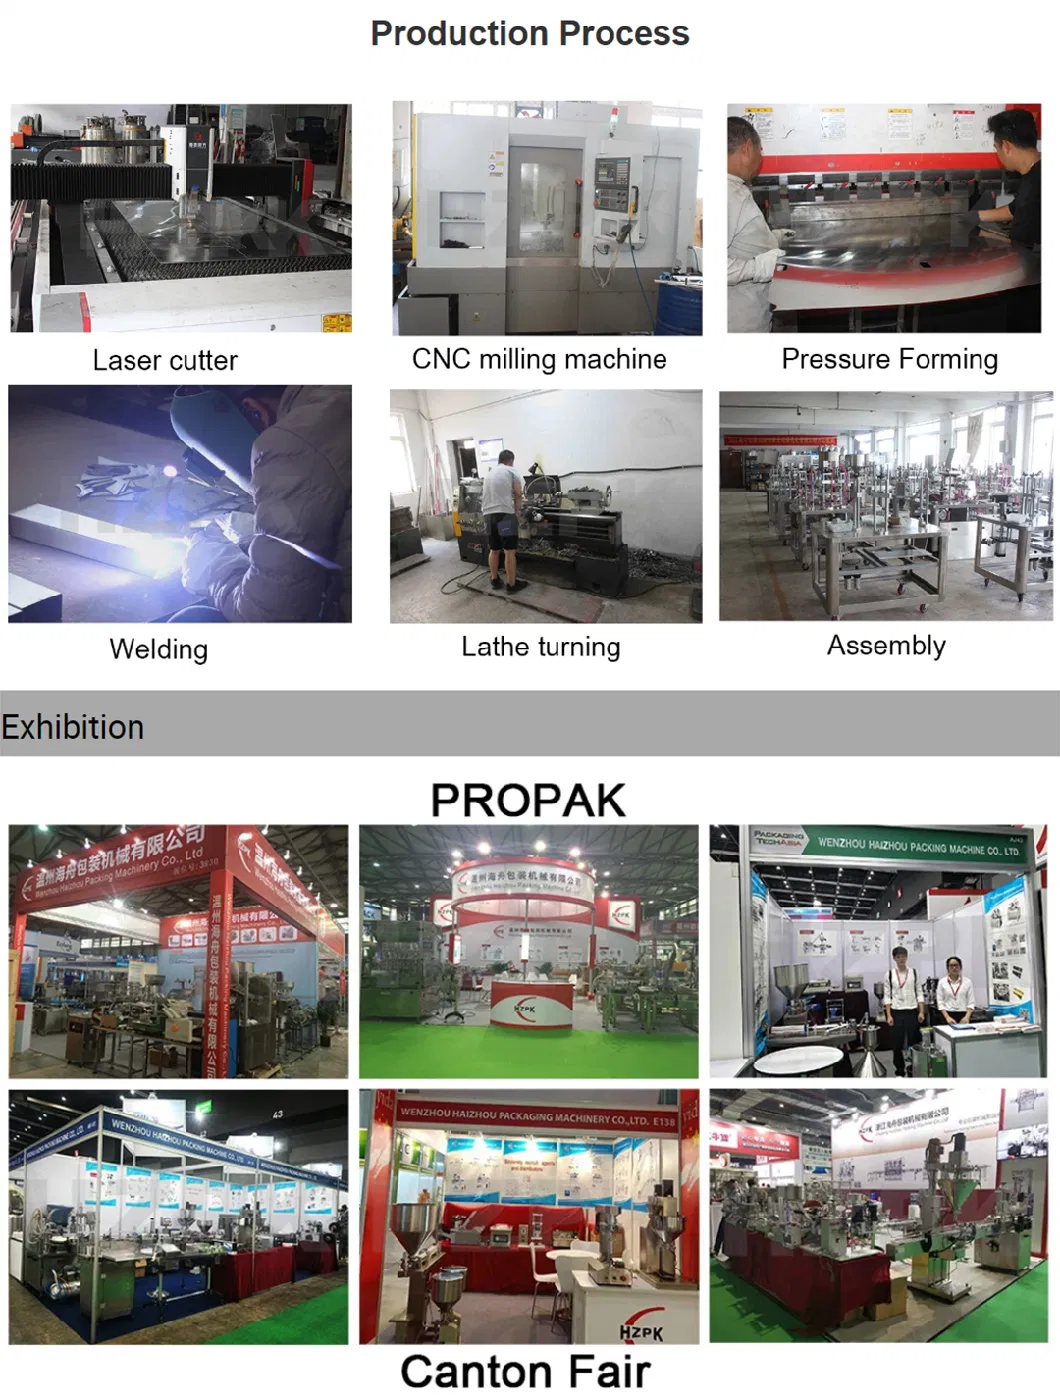 Hzpk Fr-900 Heat Seal Sealer Continue Ready Made Coffee Bags Filling Machines Mylar Plastic Bag Packing Sealing Machine for Noodles